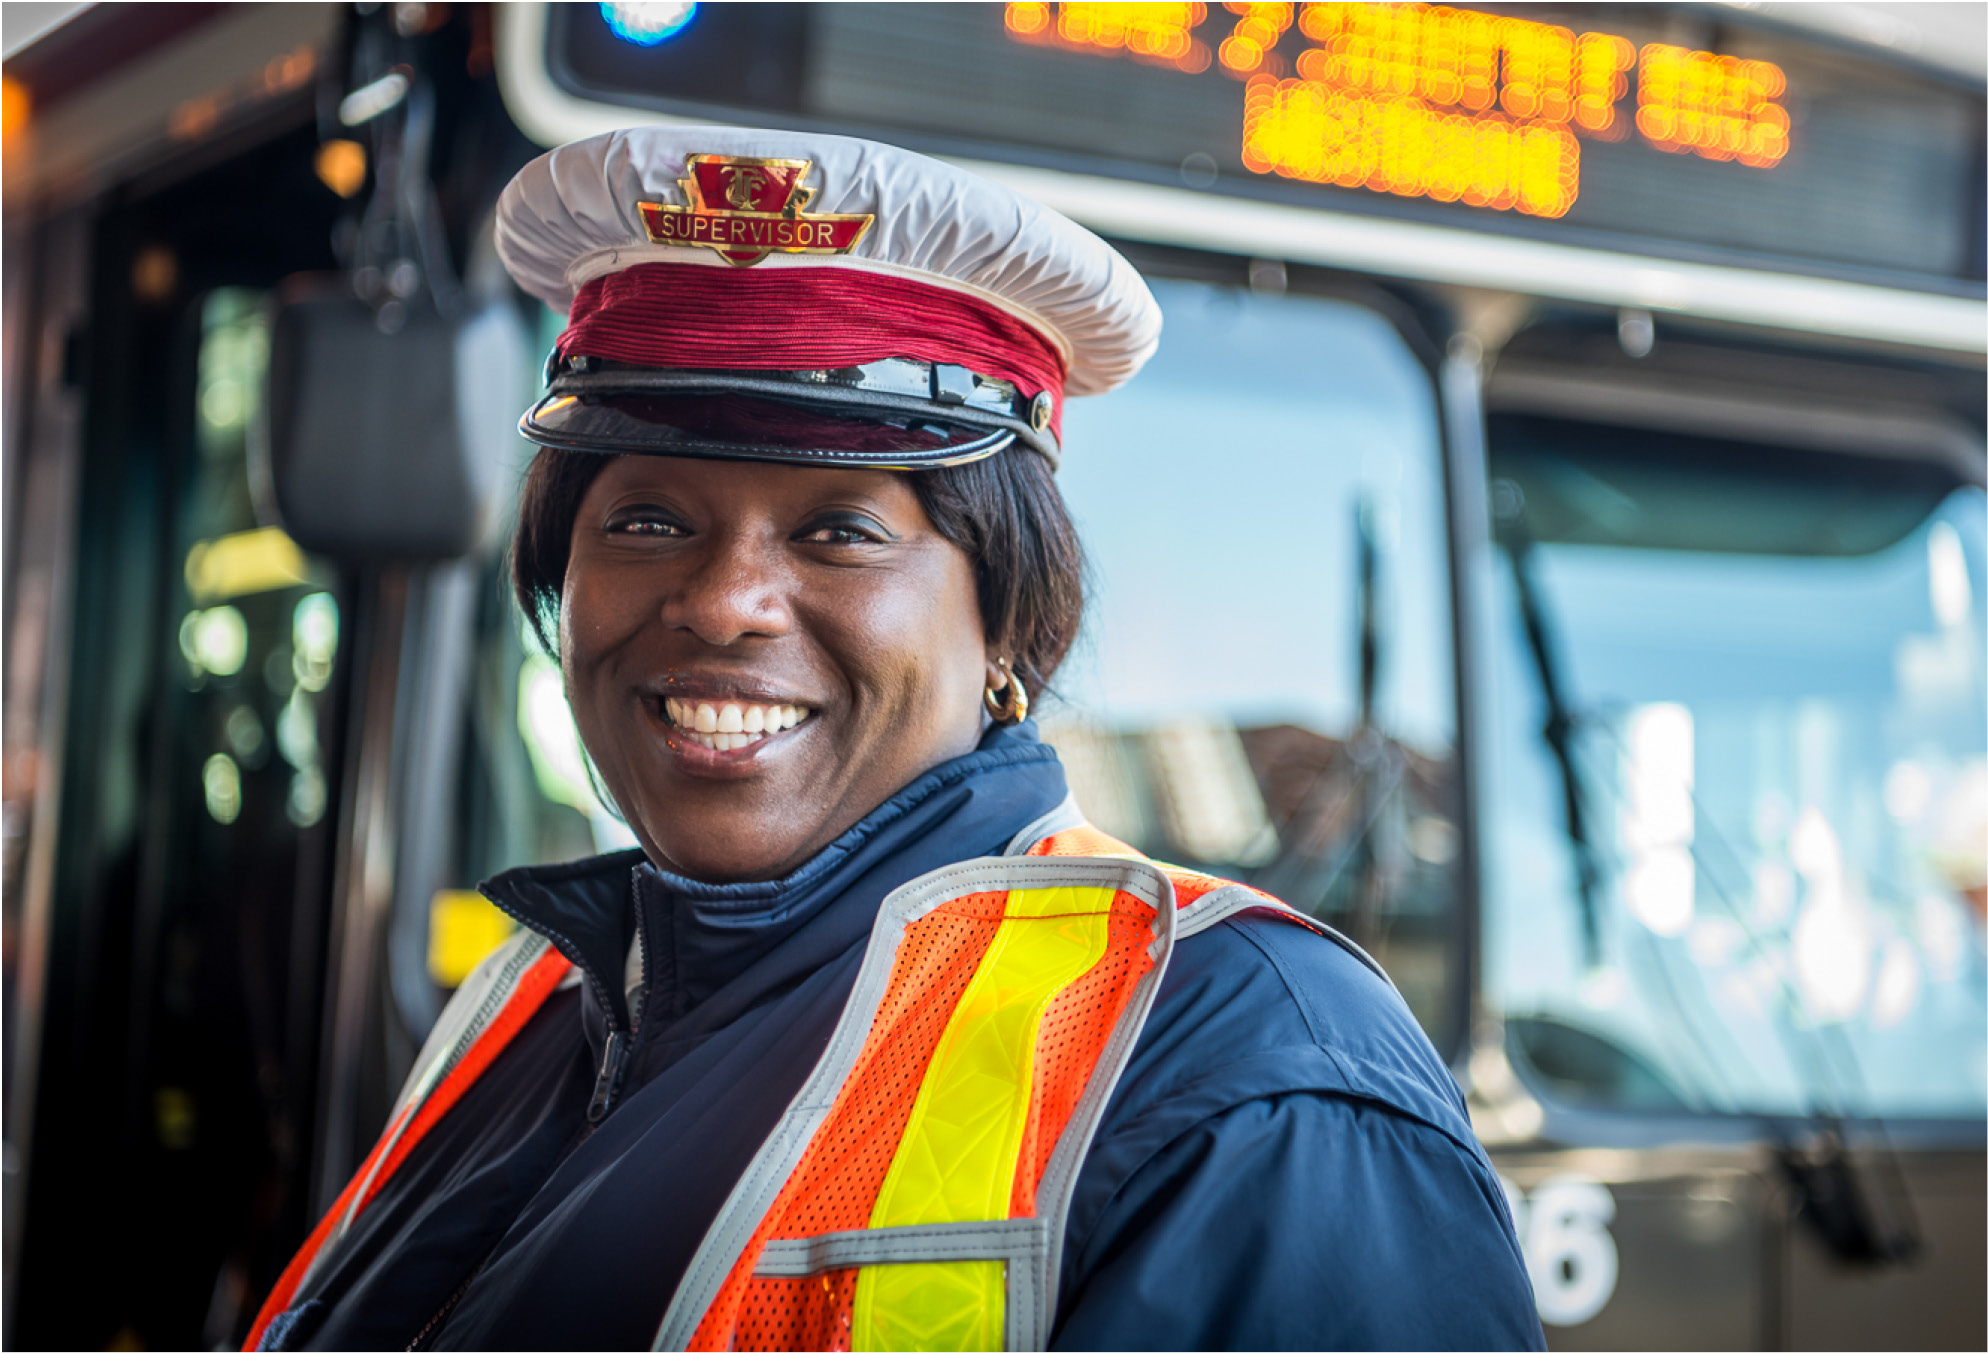 smiling TTC woman bus operator in uniform and orange safety vest on